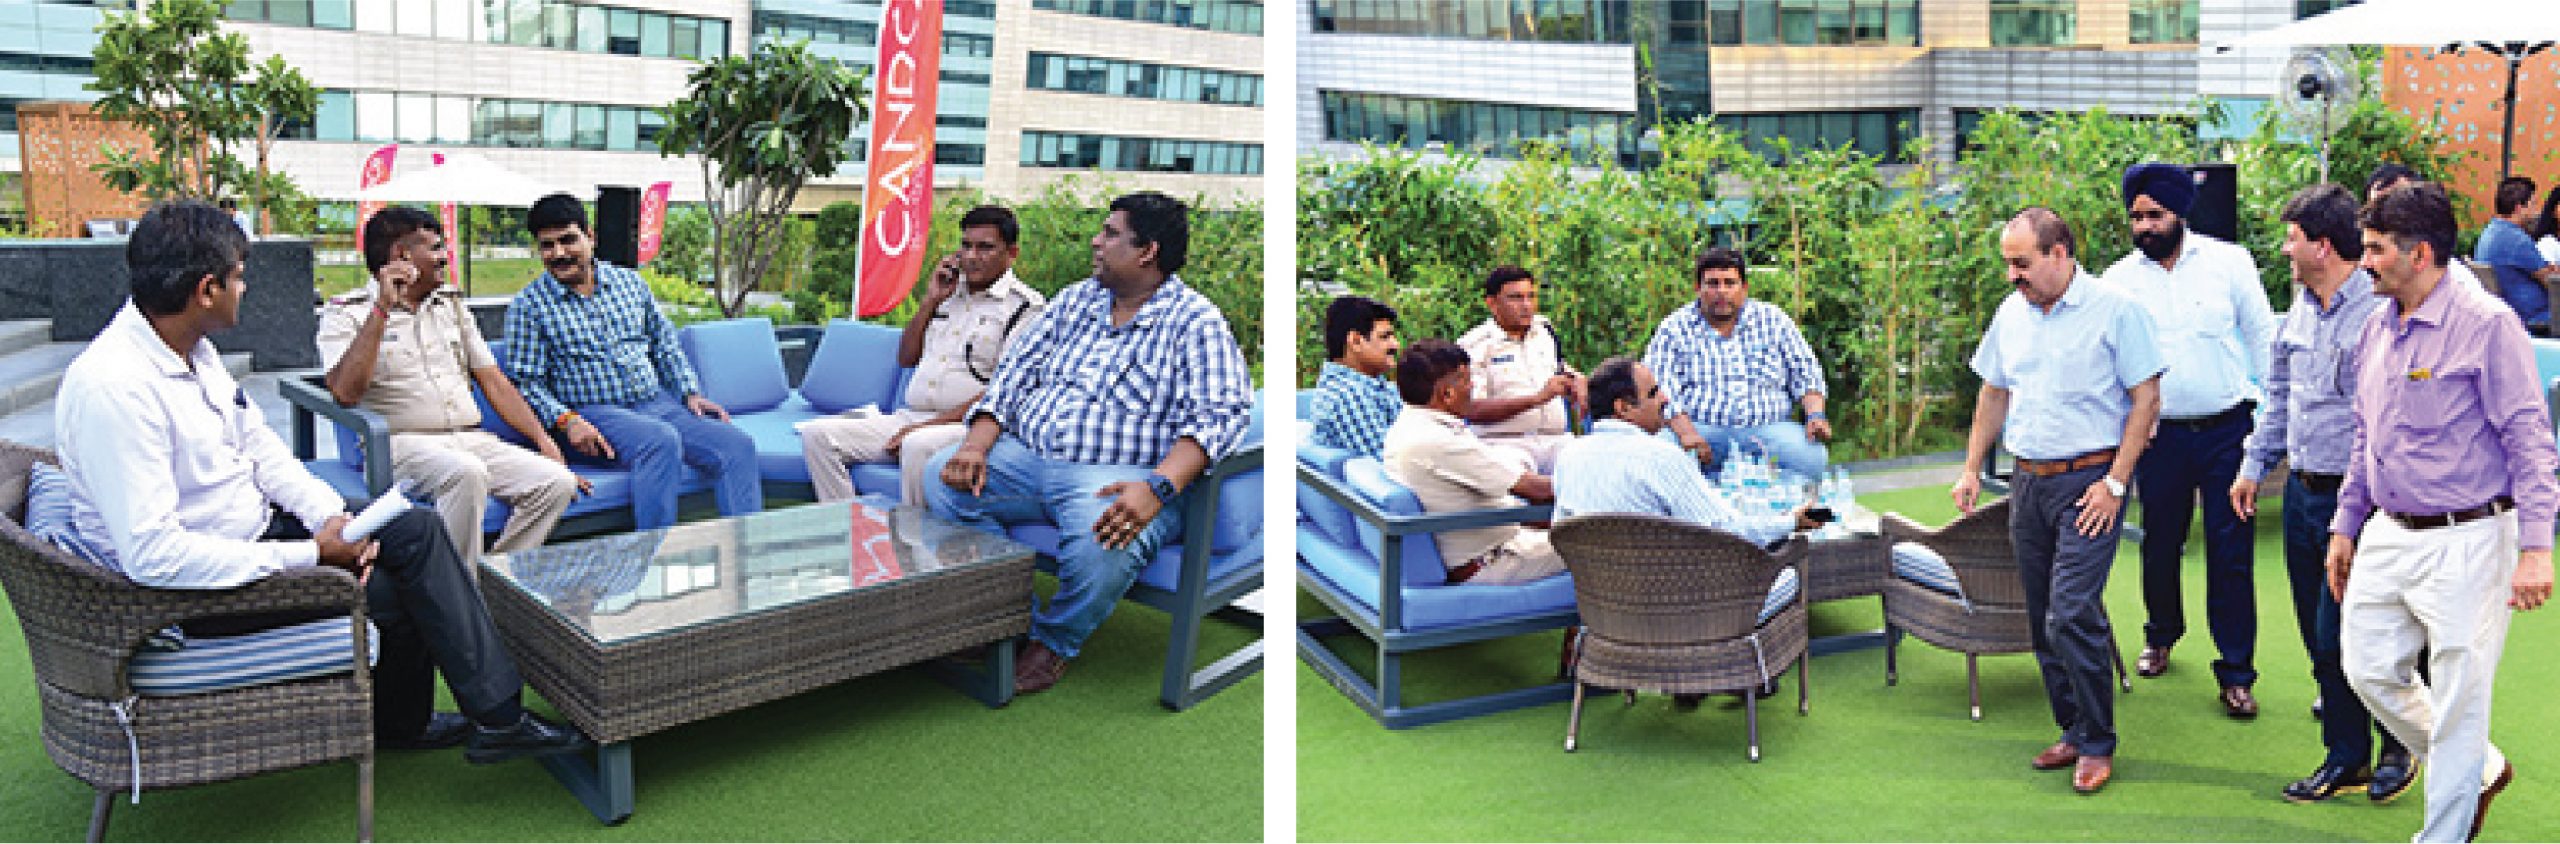 Conversations galore, at the inauguration & Some of the attendees at the event - Candor TechSpace